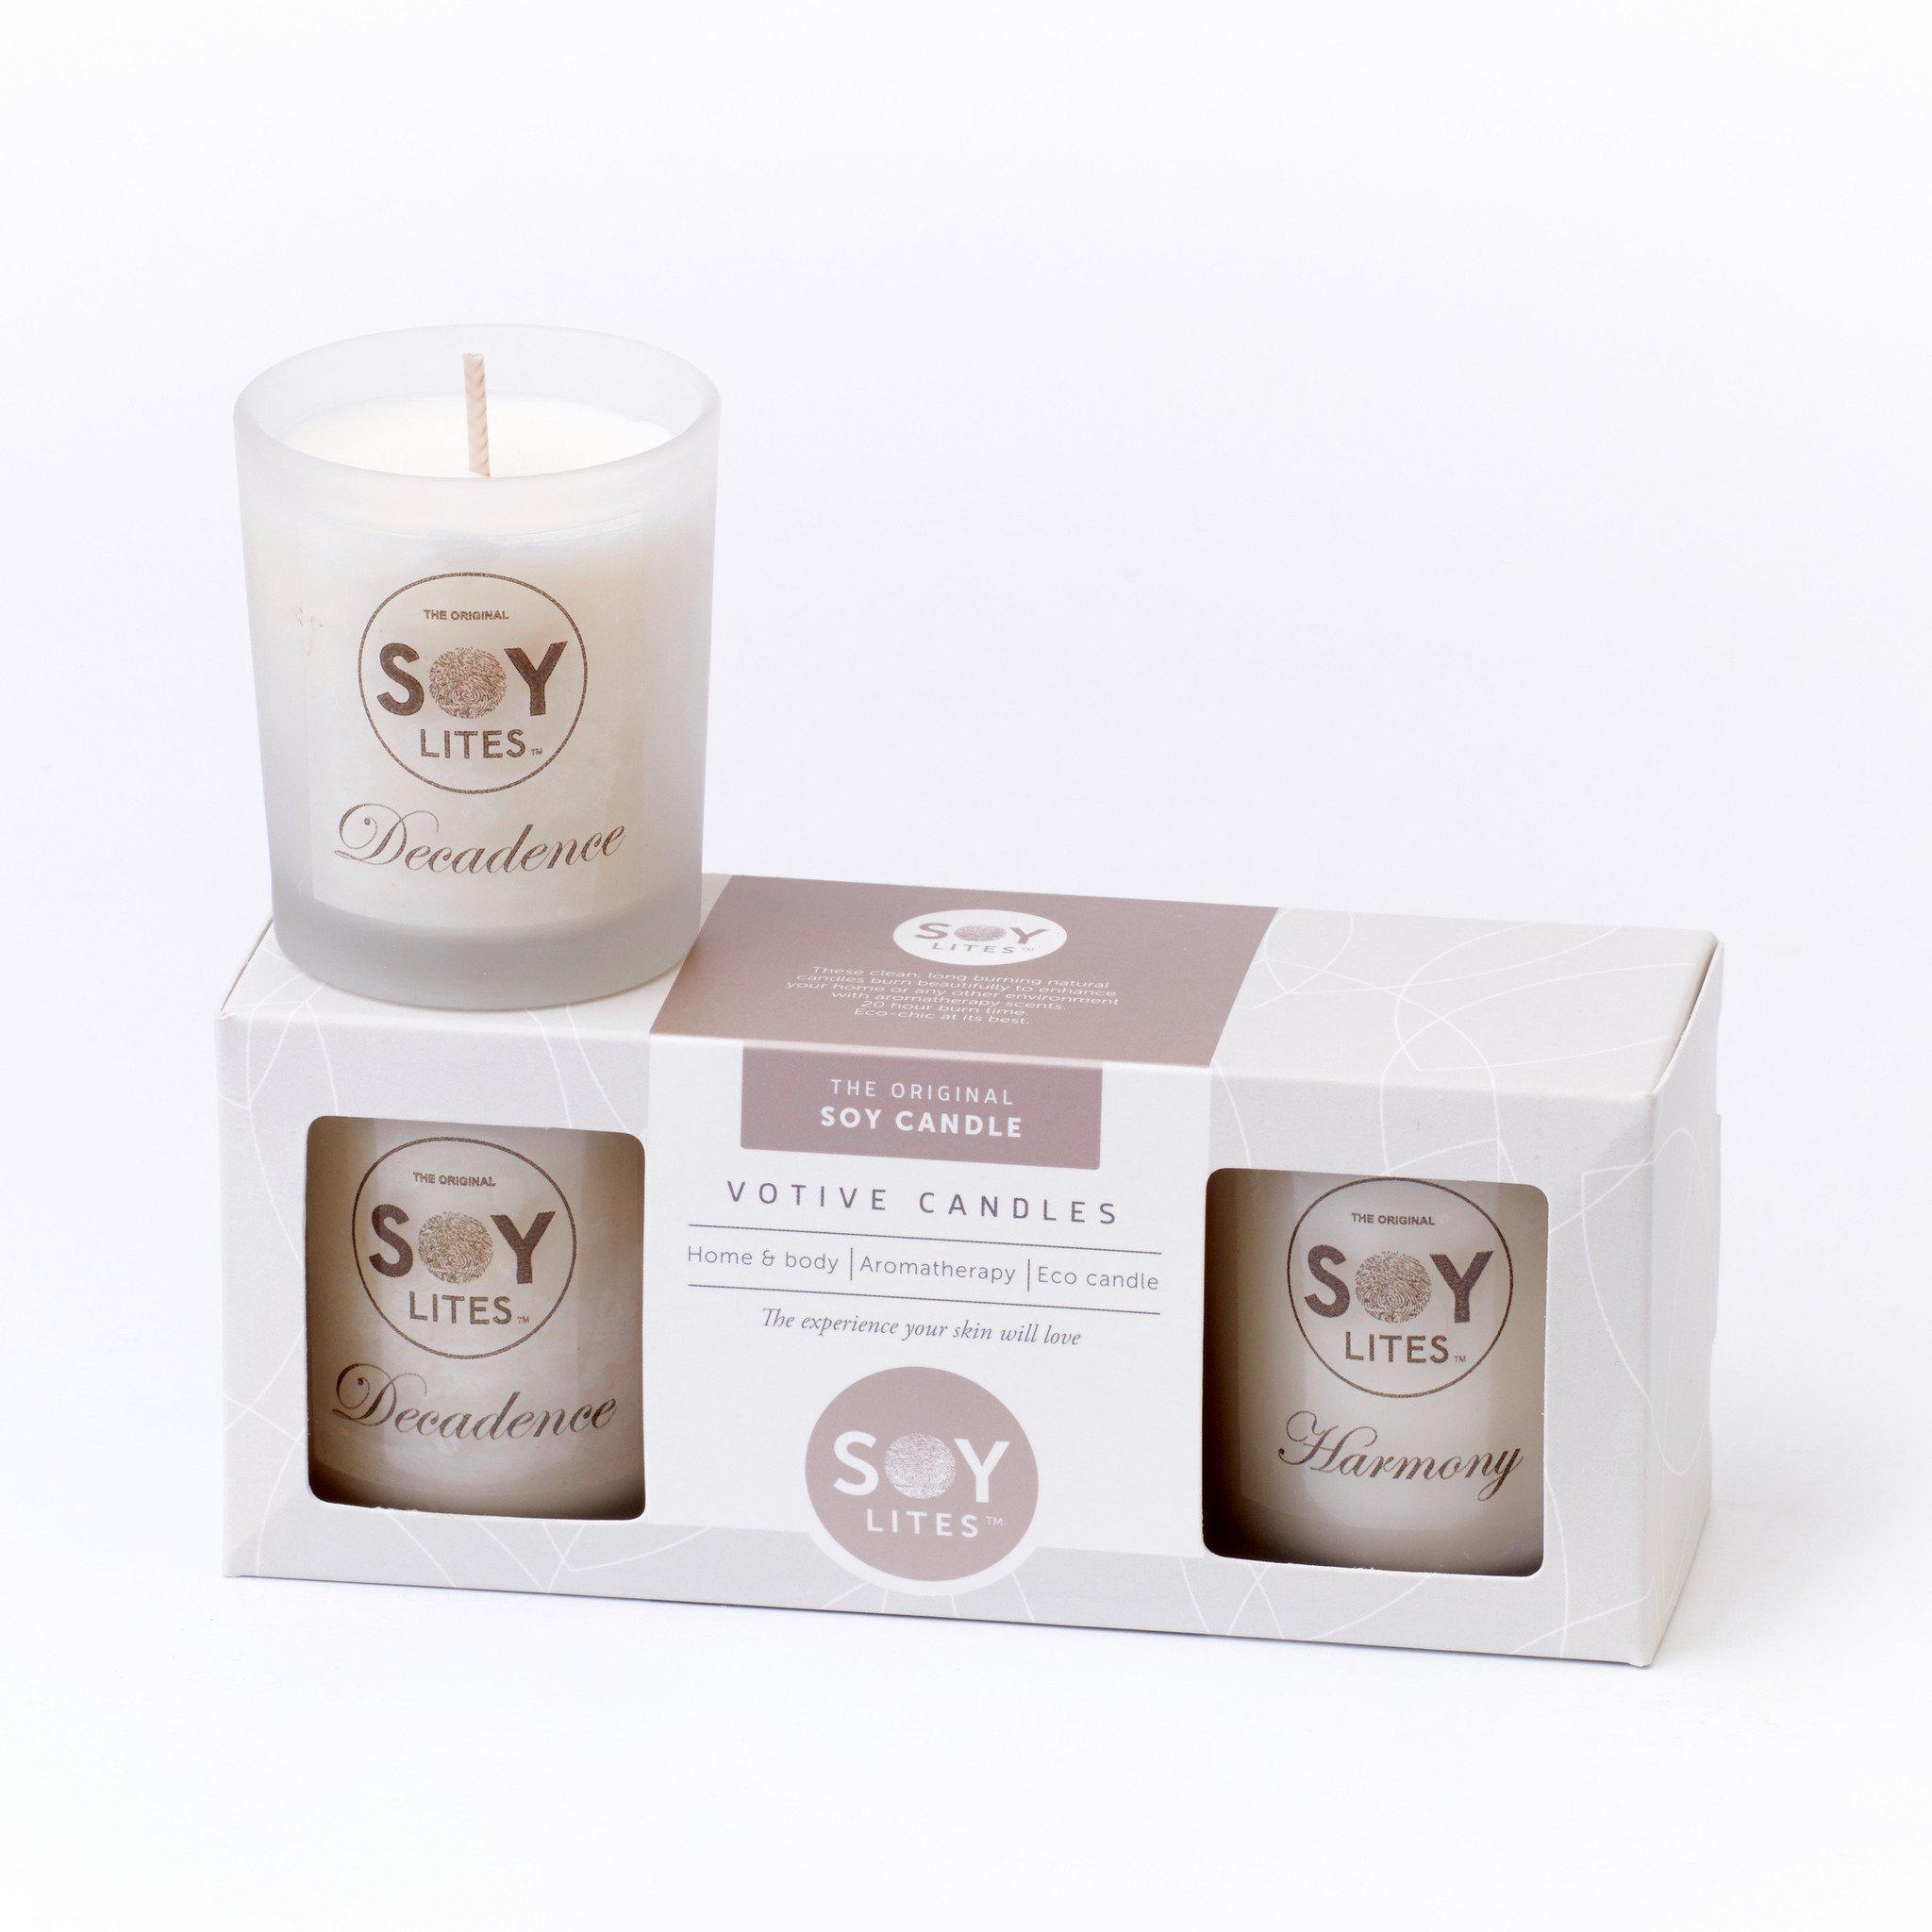 Classic Votive Gift Pack 2 with Serenity, Decadence & Balance